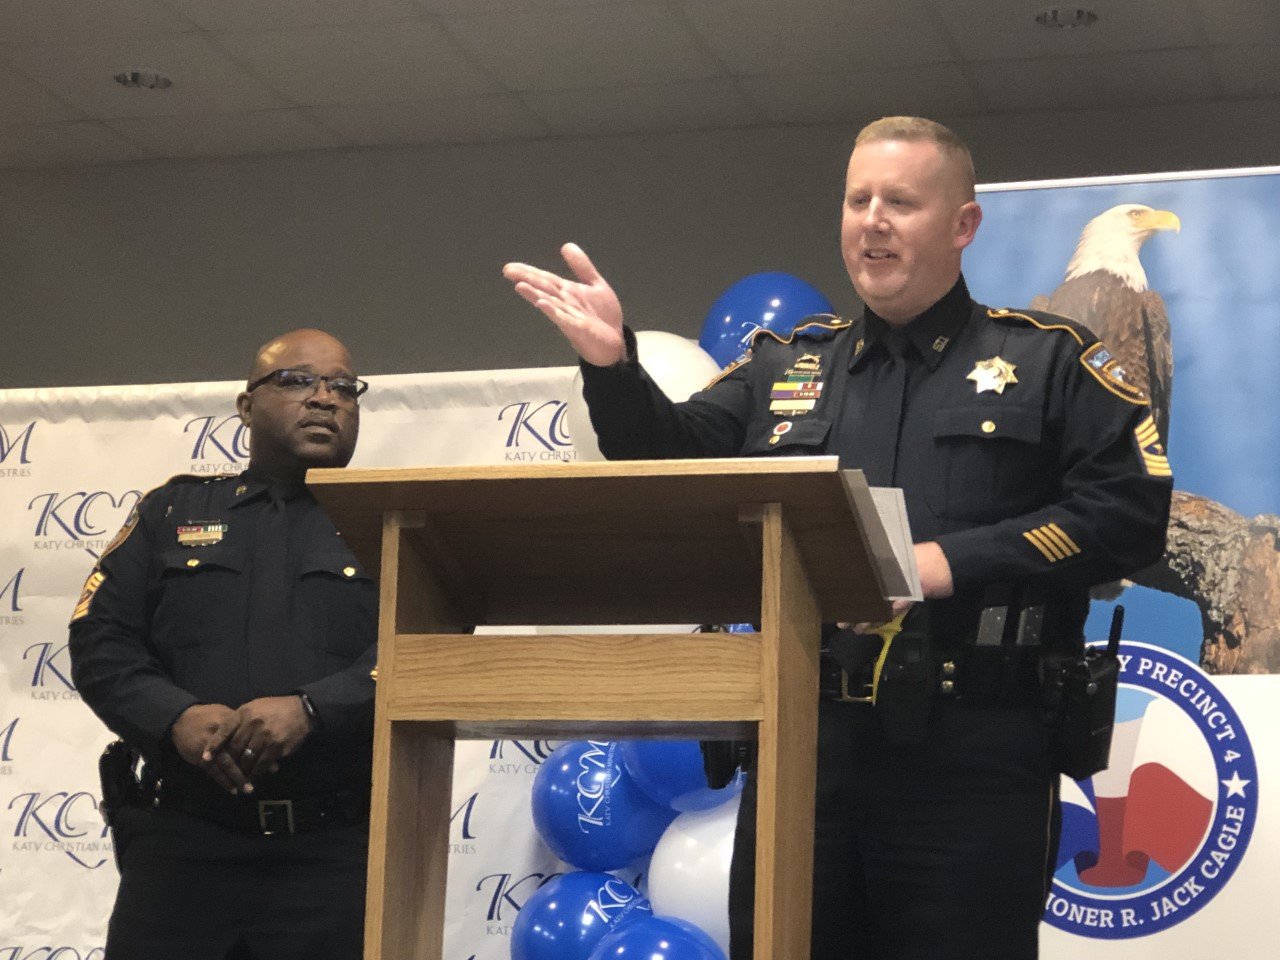 Harris County Sgt. Tommy Smith, left, listens as Sgt. John Klafka speaks at the dedication of a victim service and support center at Katy Christian Ministries.